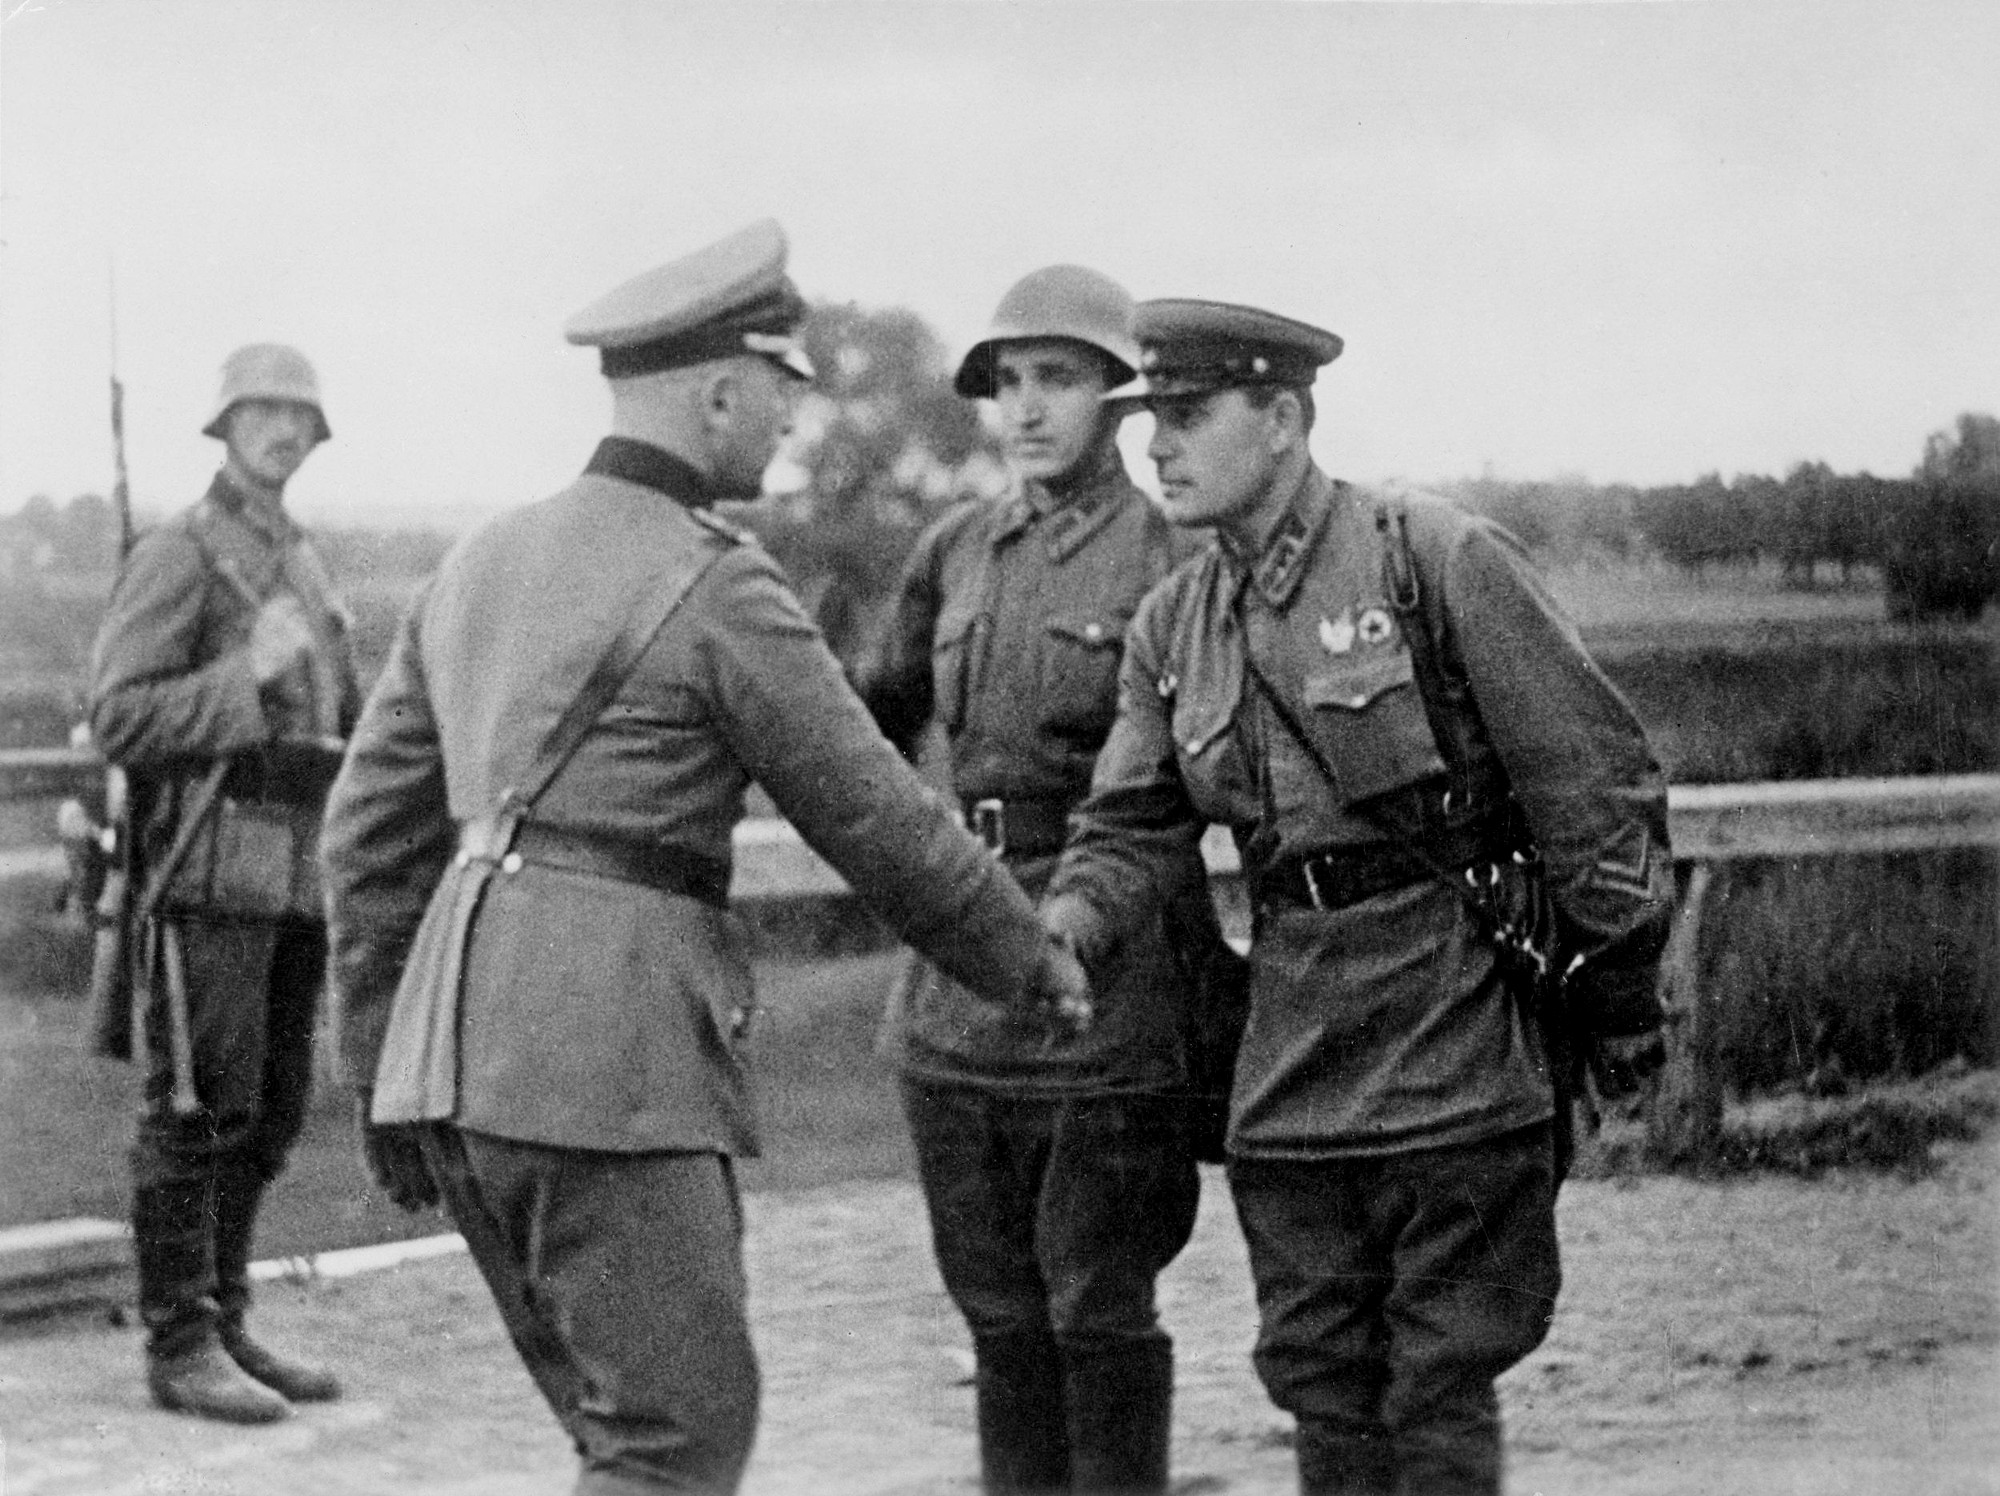 German and Soviet commanders meet at the Nazi-Soviet demarcation line in Poland, after a successful invasion, September 1939